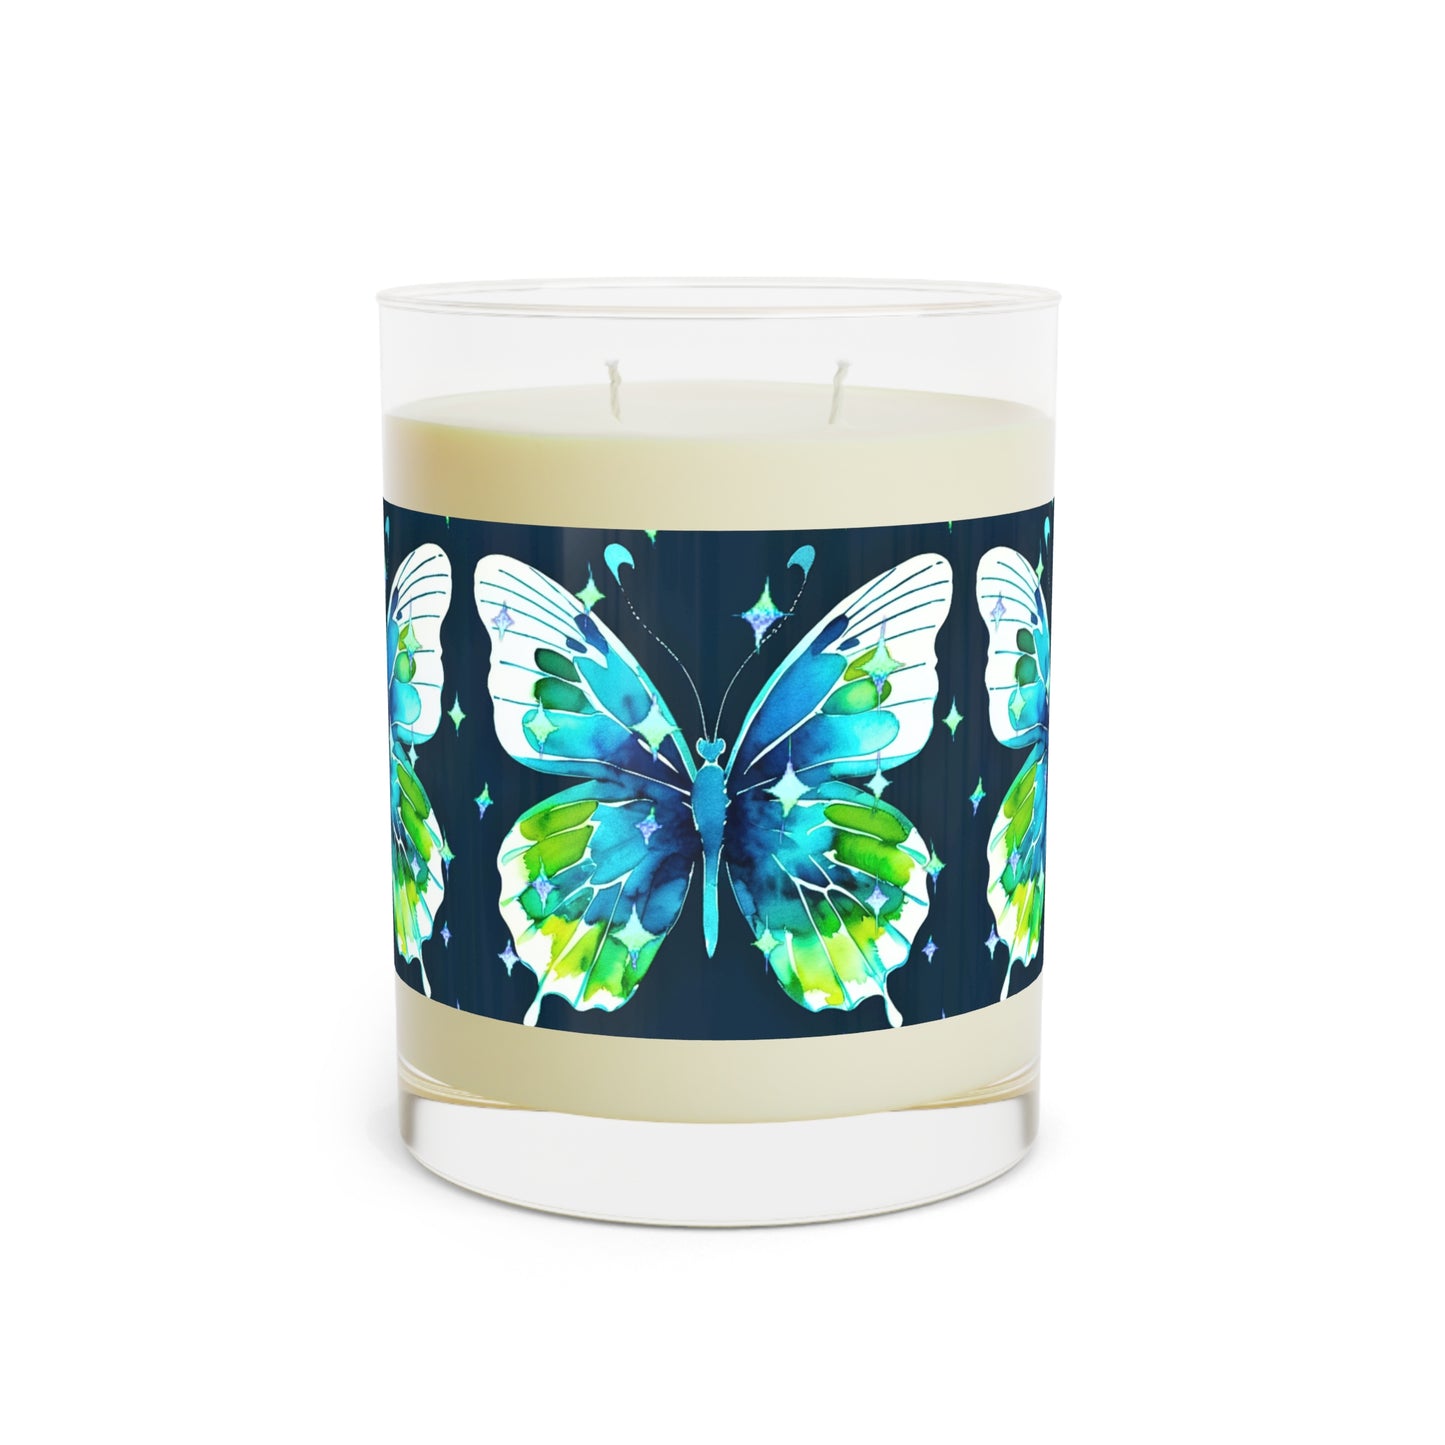 Twilight Awakening Blue Butterfly Watercolor Aromatherapy Essential Oils Natural Decorative Scented Candle - Full Glass, 11oz